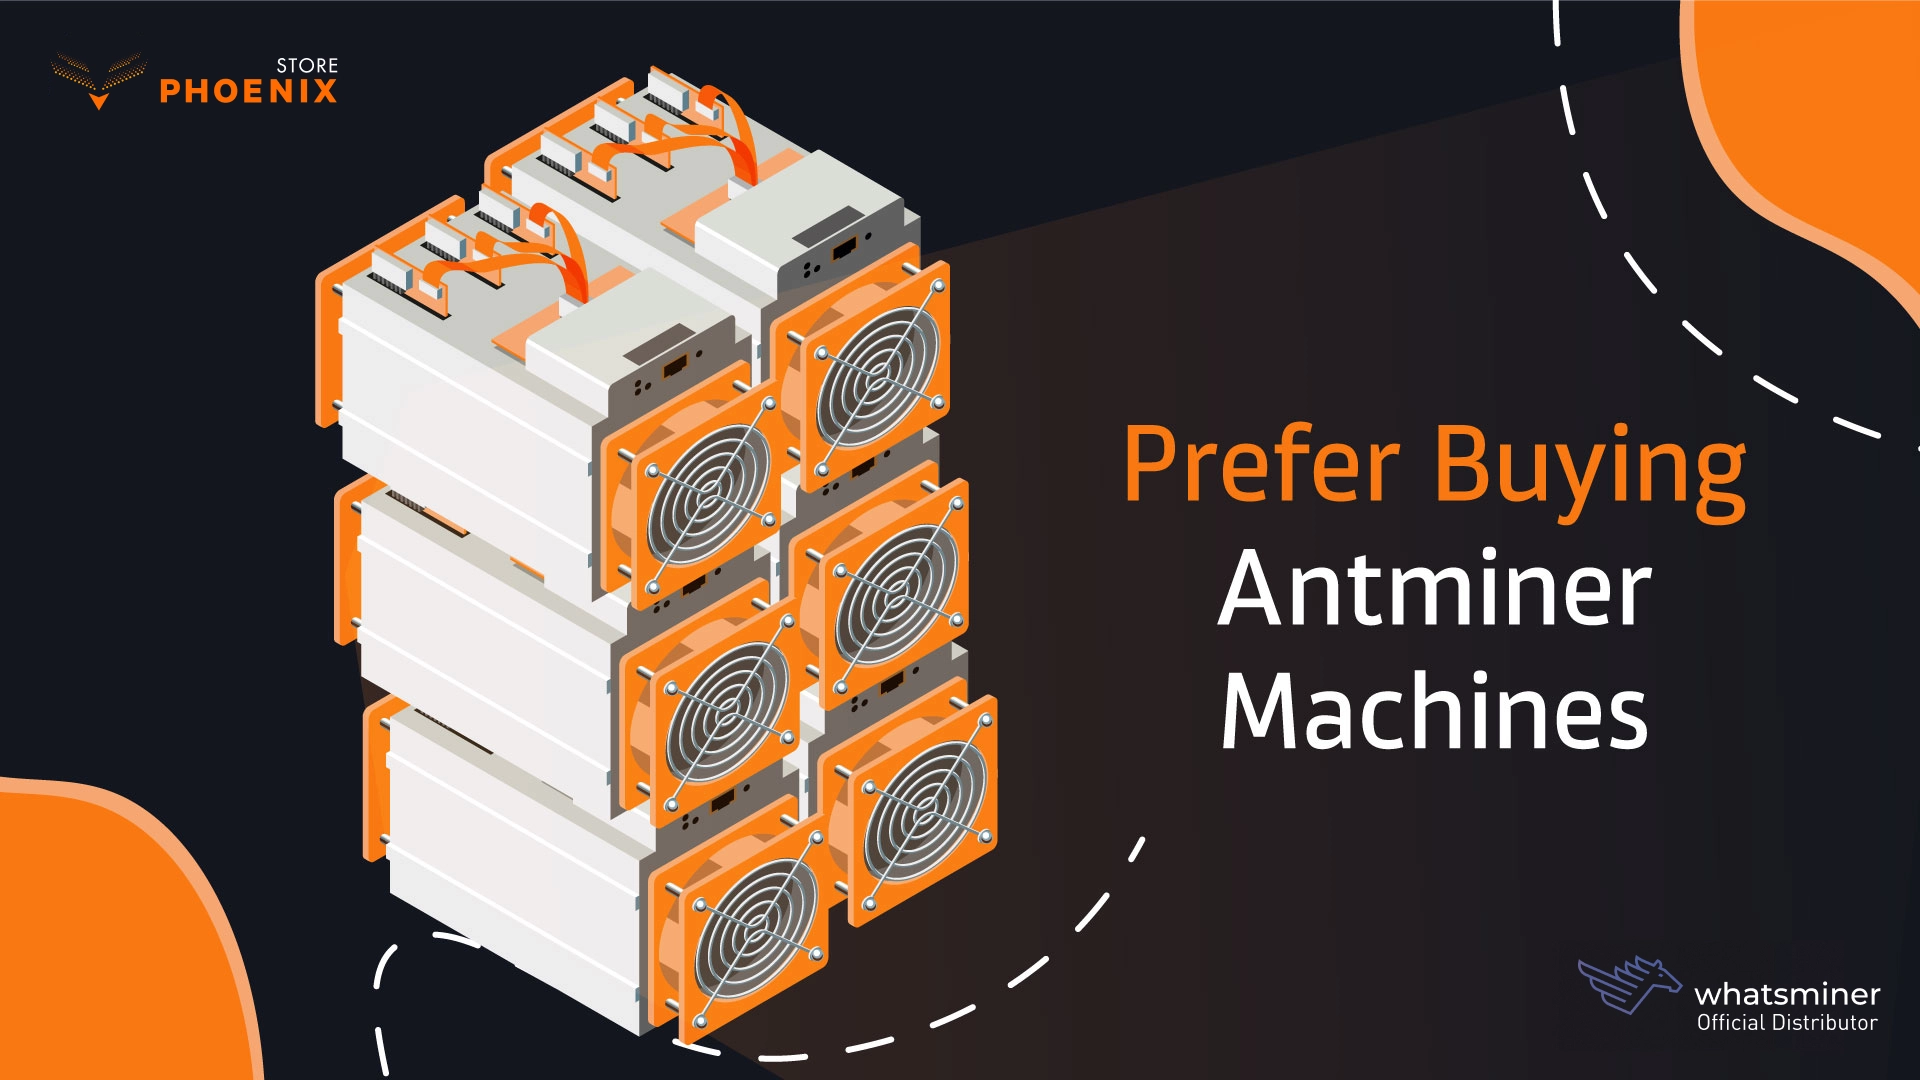 Why to Prefer Buying Antminer Machines for Bitcoin Mining?